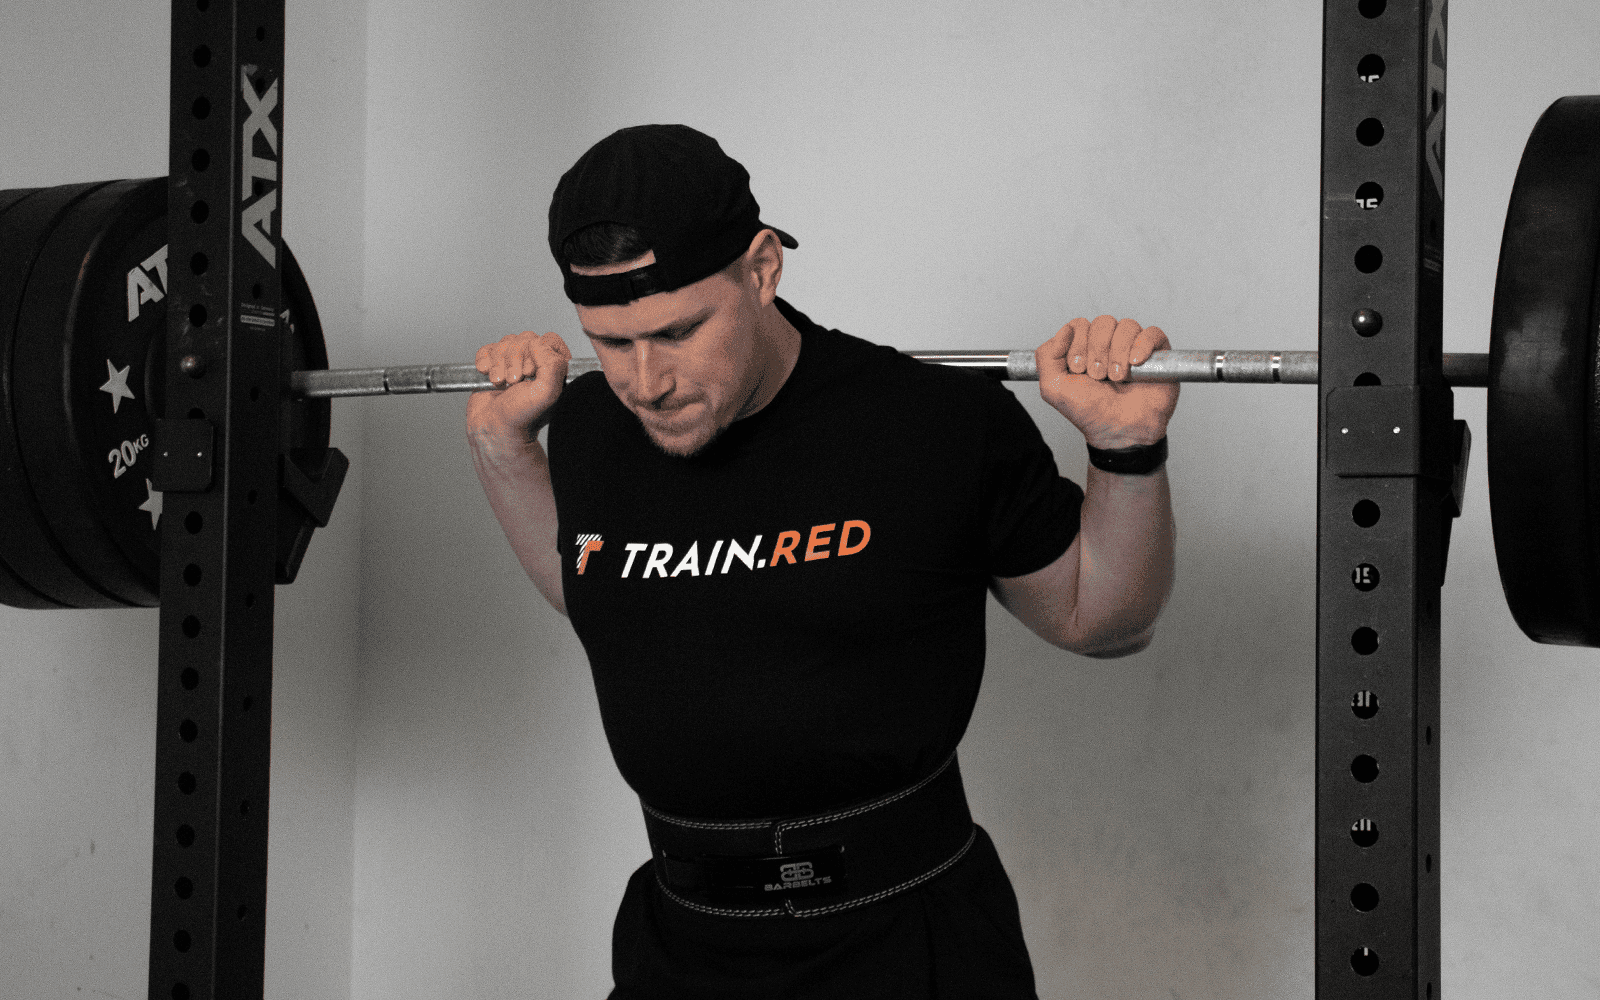 Beginner’s Guide EP3: Using Train.Red app to guide your squat training - Train.Red